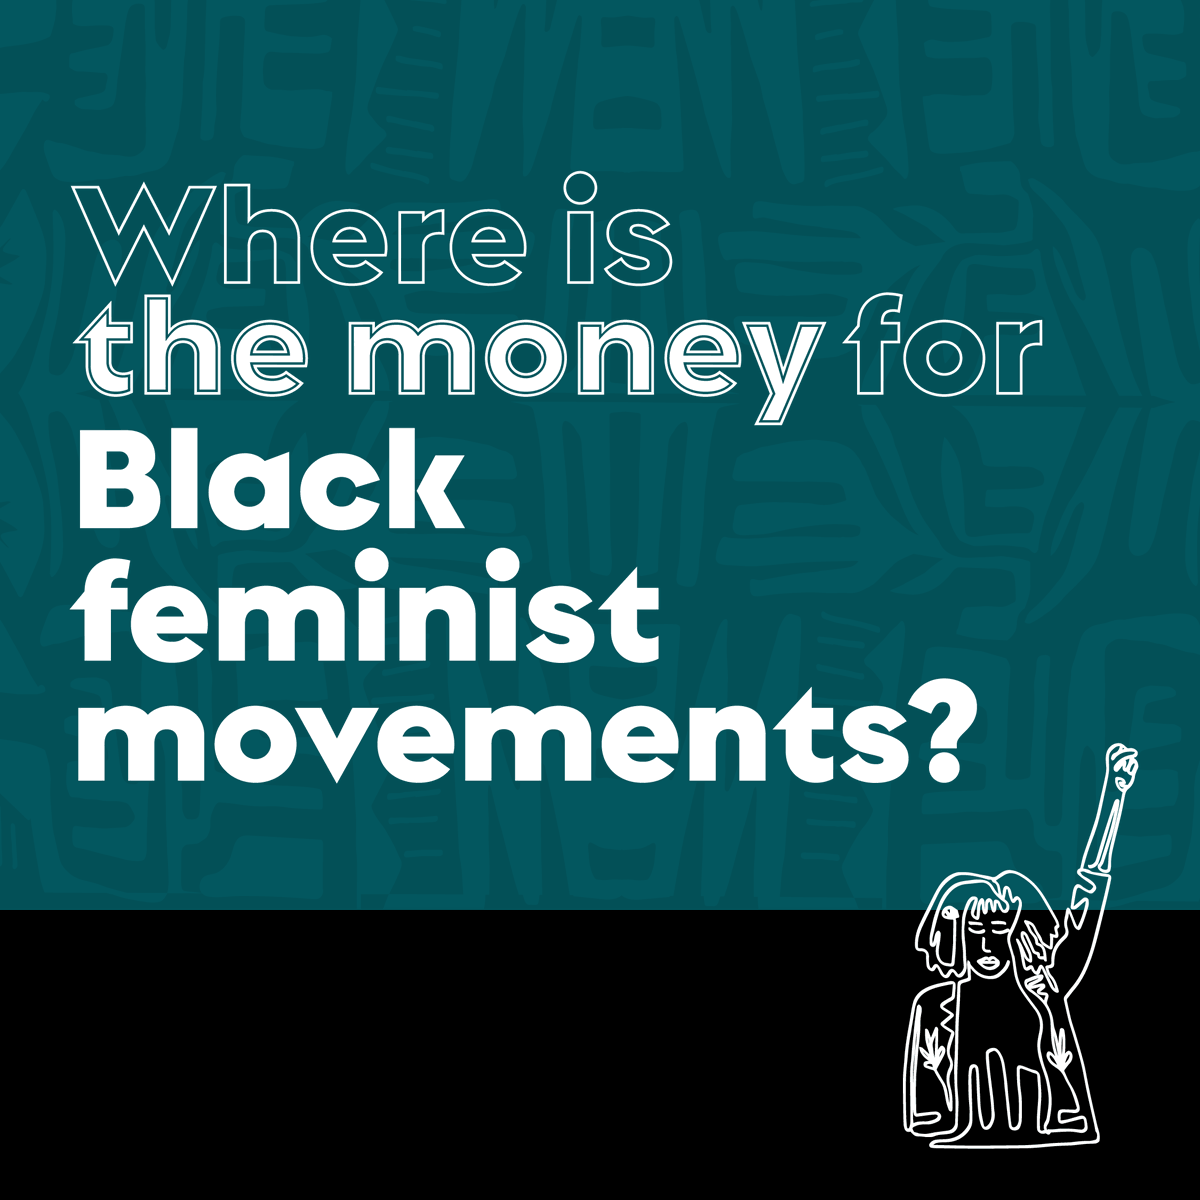 We’re sharing the powerful call to action of @BlackFemFund to abundantly fund Black feminist movements. Black-led organizations and activists continue to be drivers of change.  #BlackFeministMovements #FundBlackFeminists